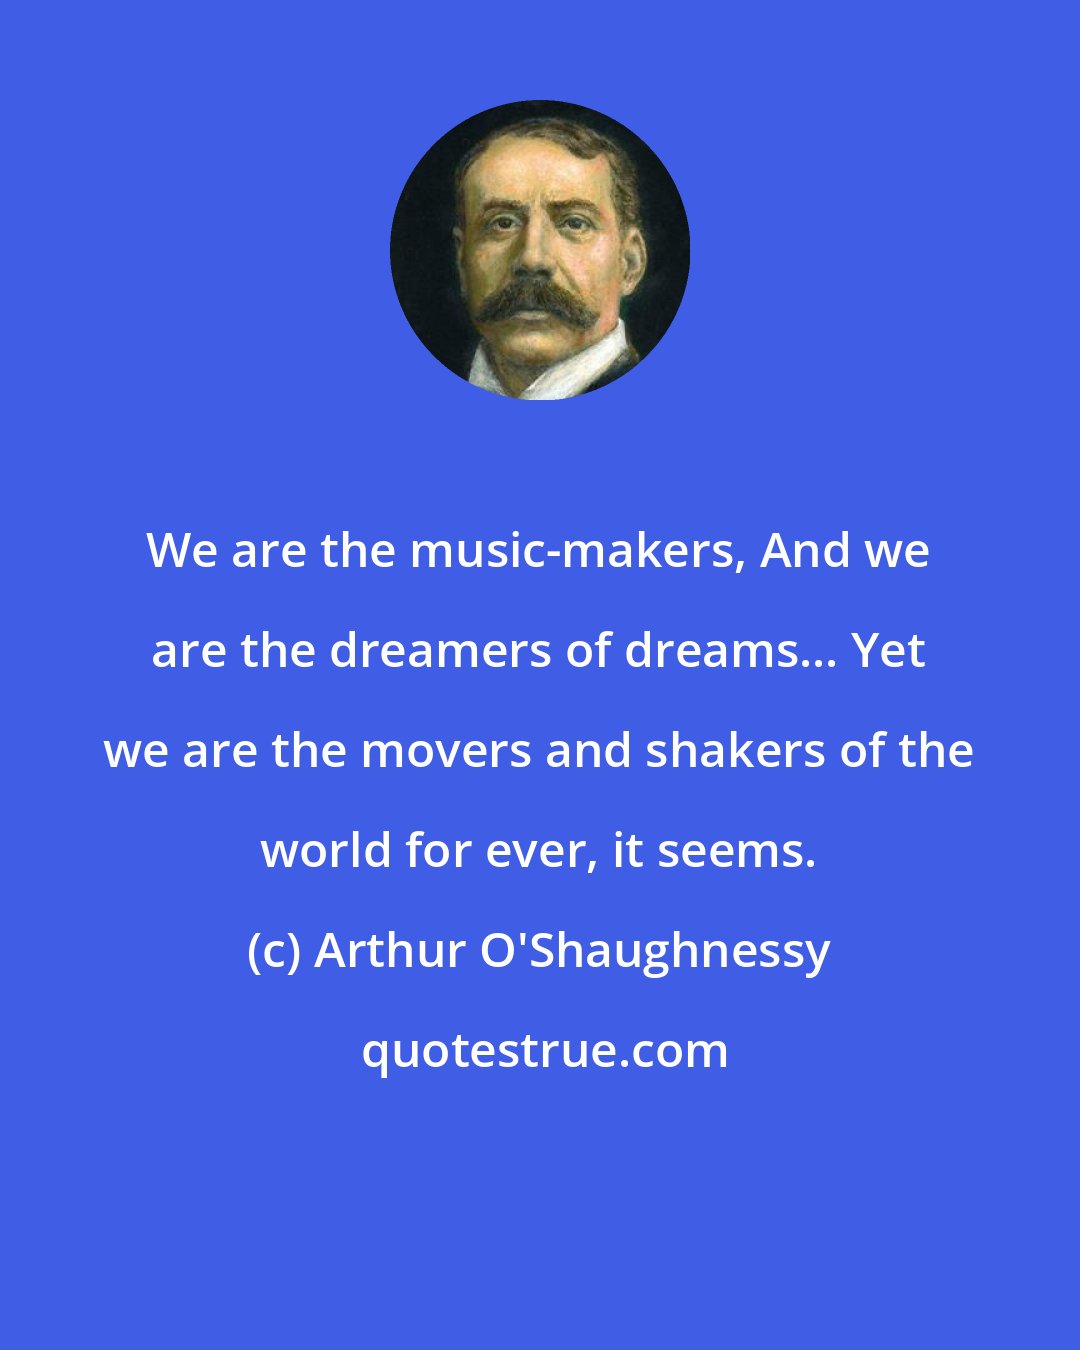 Arthur O'Shaughnessy: We are the music-makers, And we are the dreamers of dreams... Yet we are the movers and shakers of the world for ever, it seems.